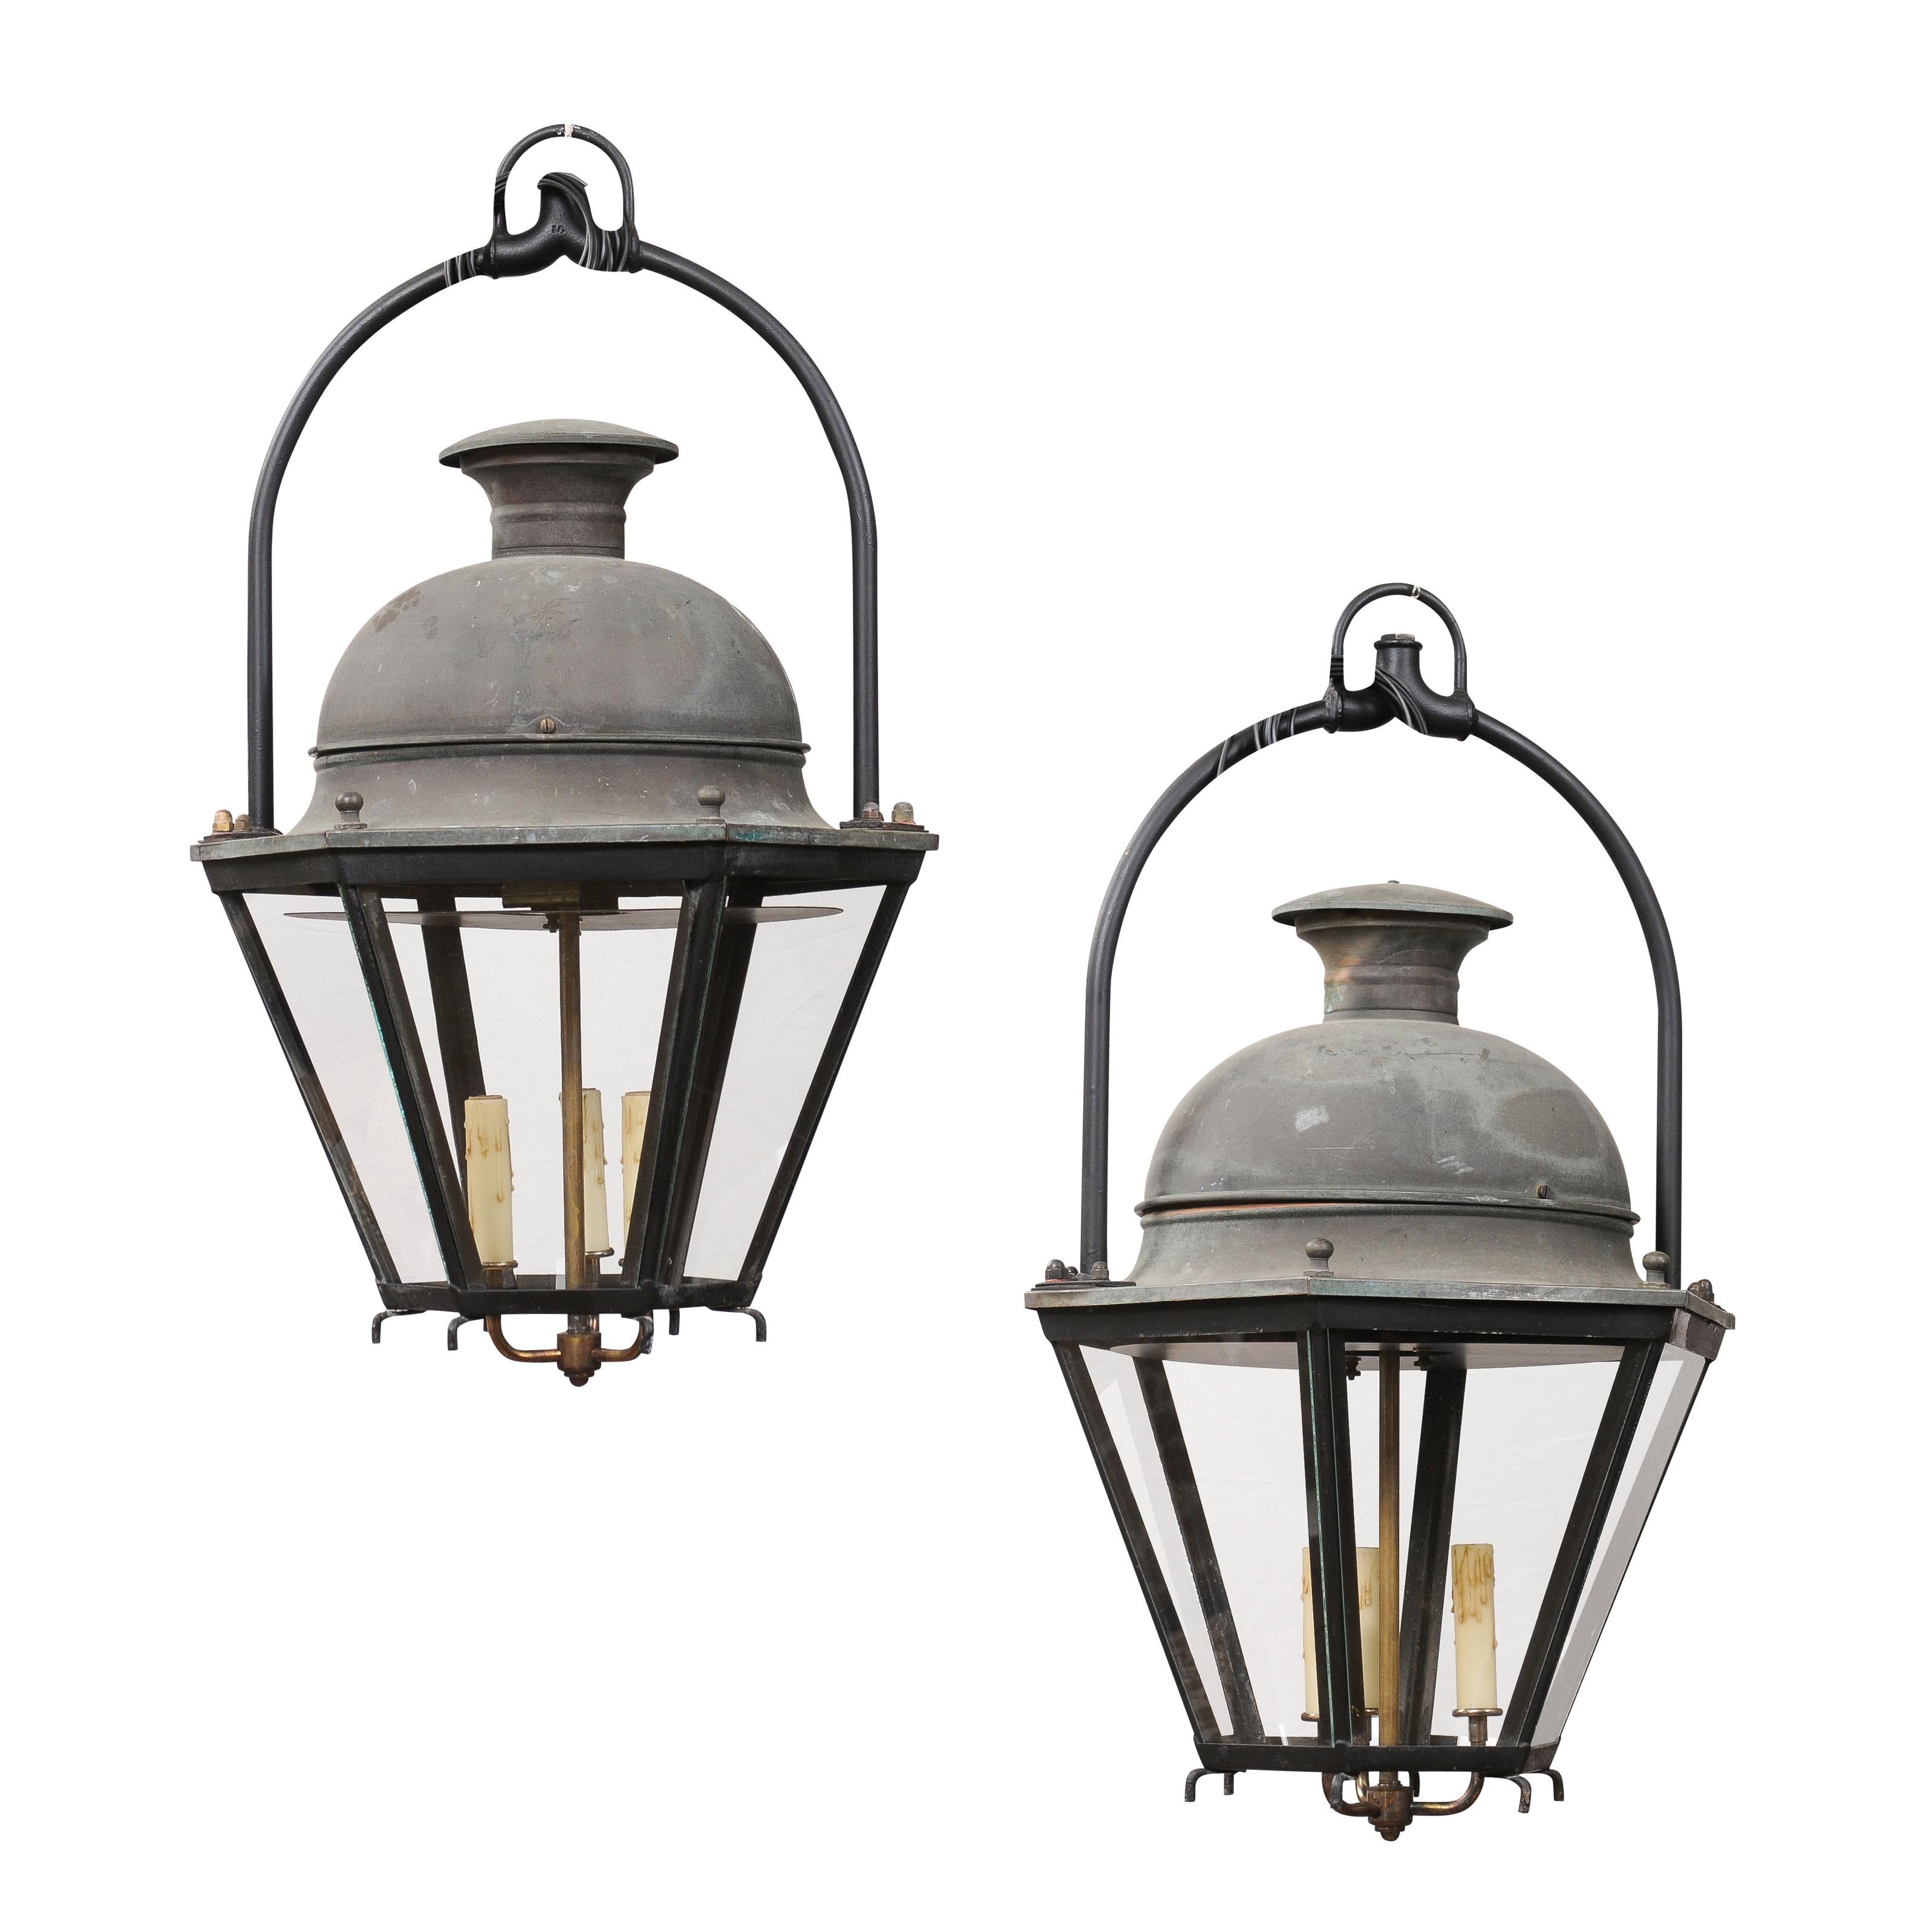 French three-light copper lanterns with hexagonal bodies, glass panels and domes, sold each. Radiating warmth and vintage elegance, these French copper lanterns from the 20th century seamlessly intertwine traditional artistry with timeless charm.